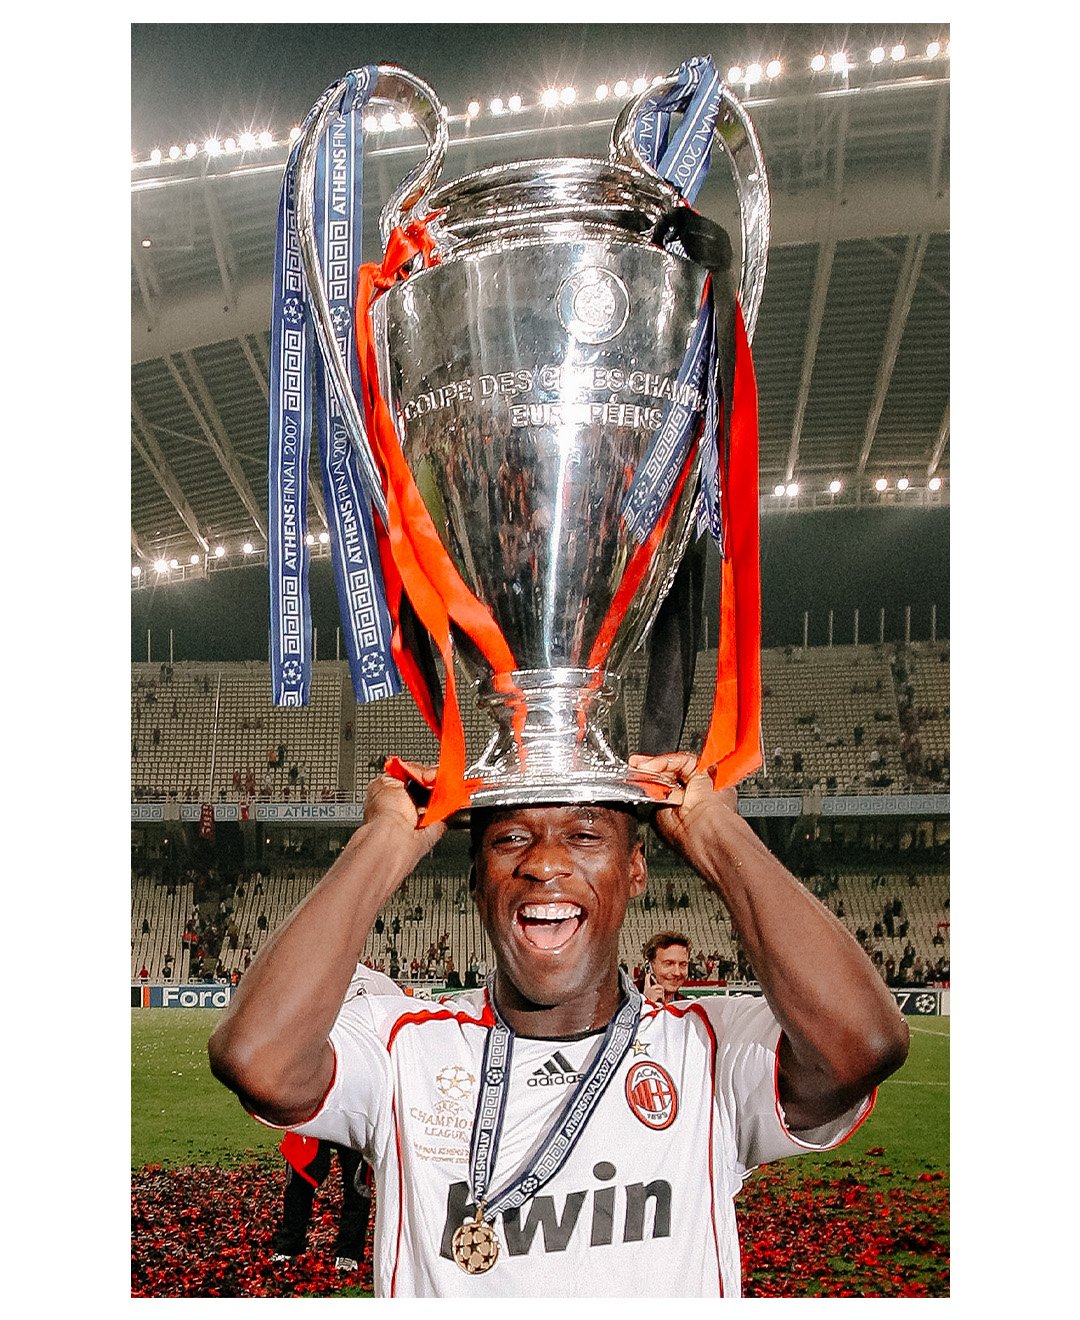 Soccer AM - Happy 44th Birthday to Clarence Seedorf! 🎉🎉🎉